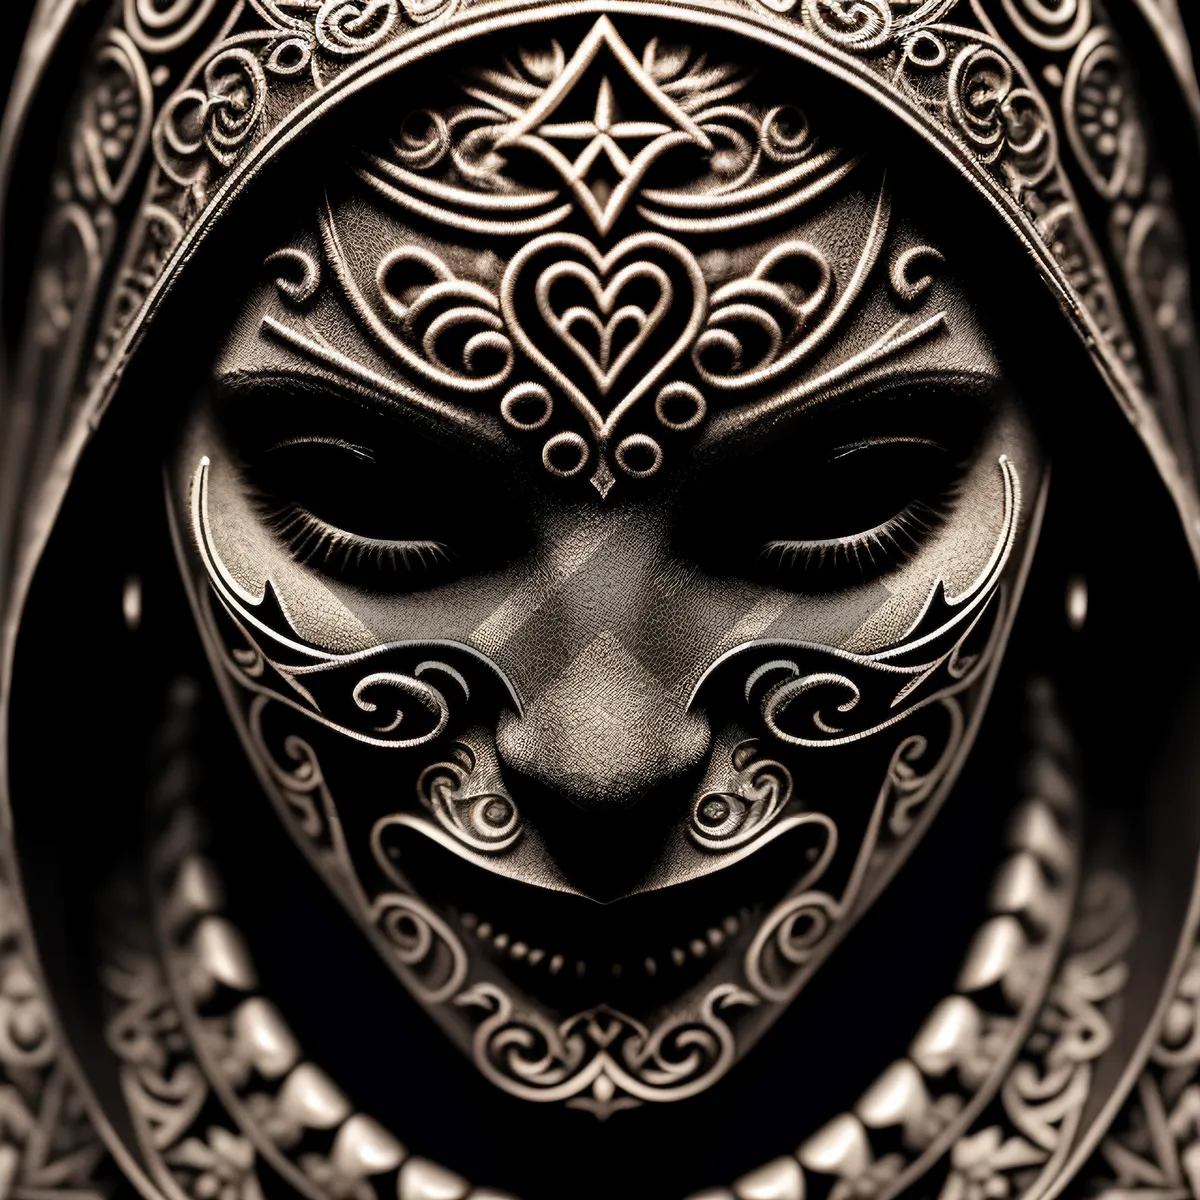 Picture of Mysterious Venetian Lady in Masked Masquerade